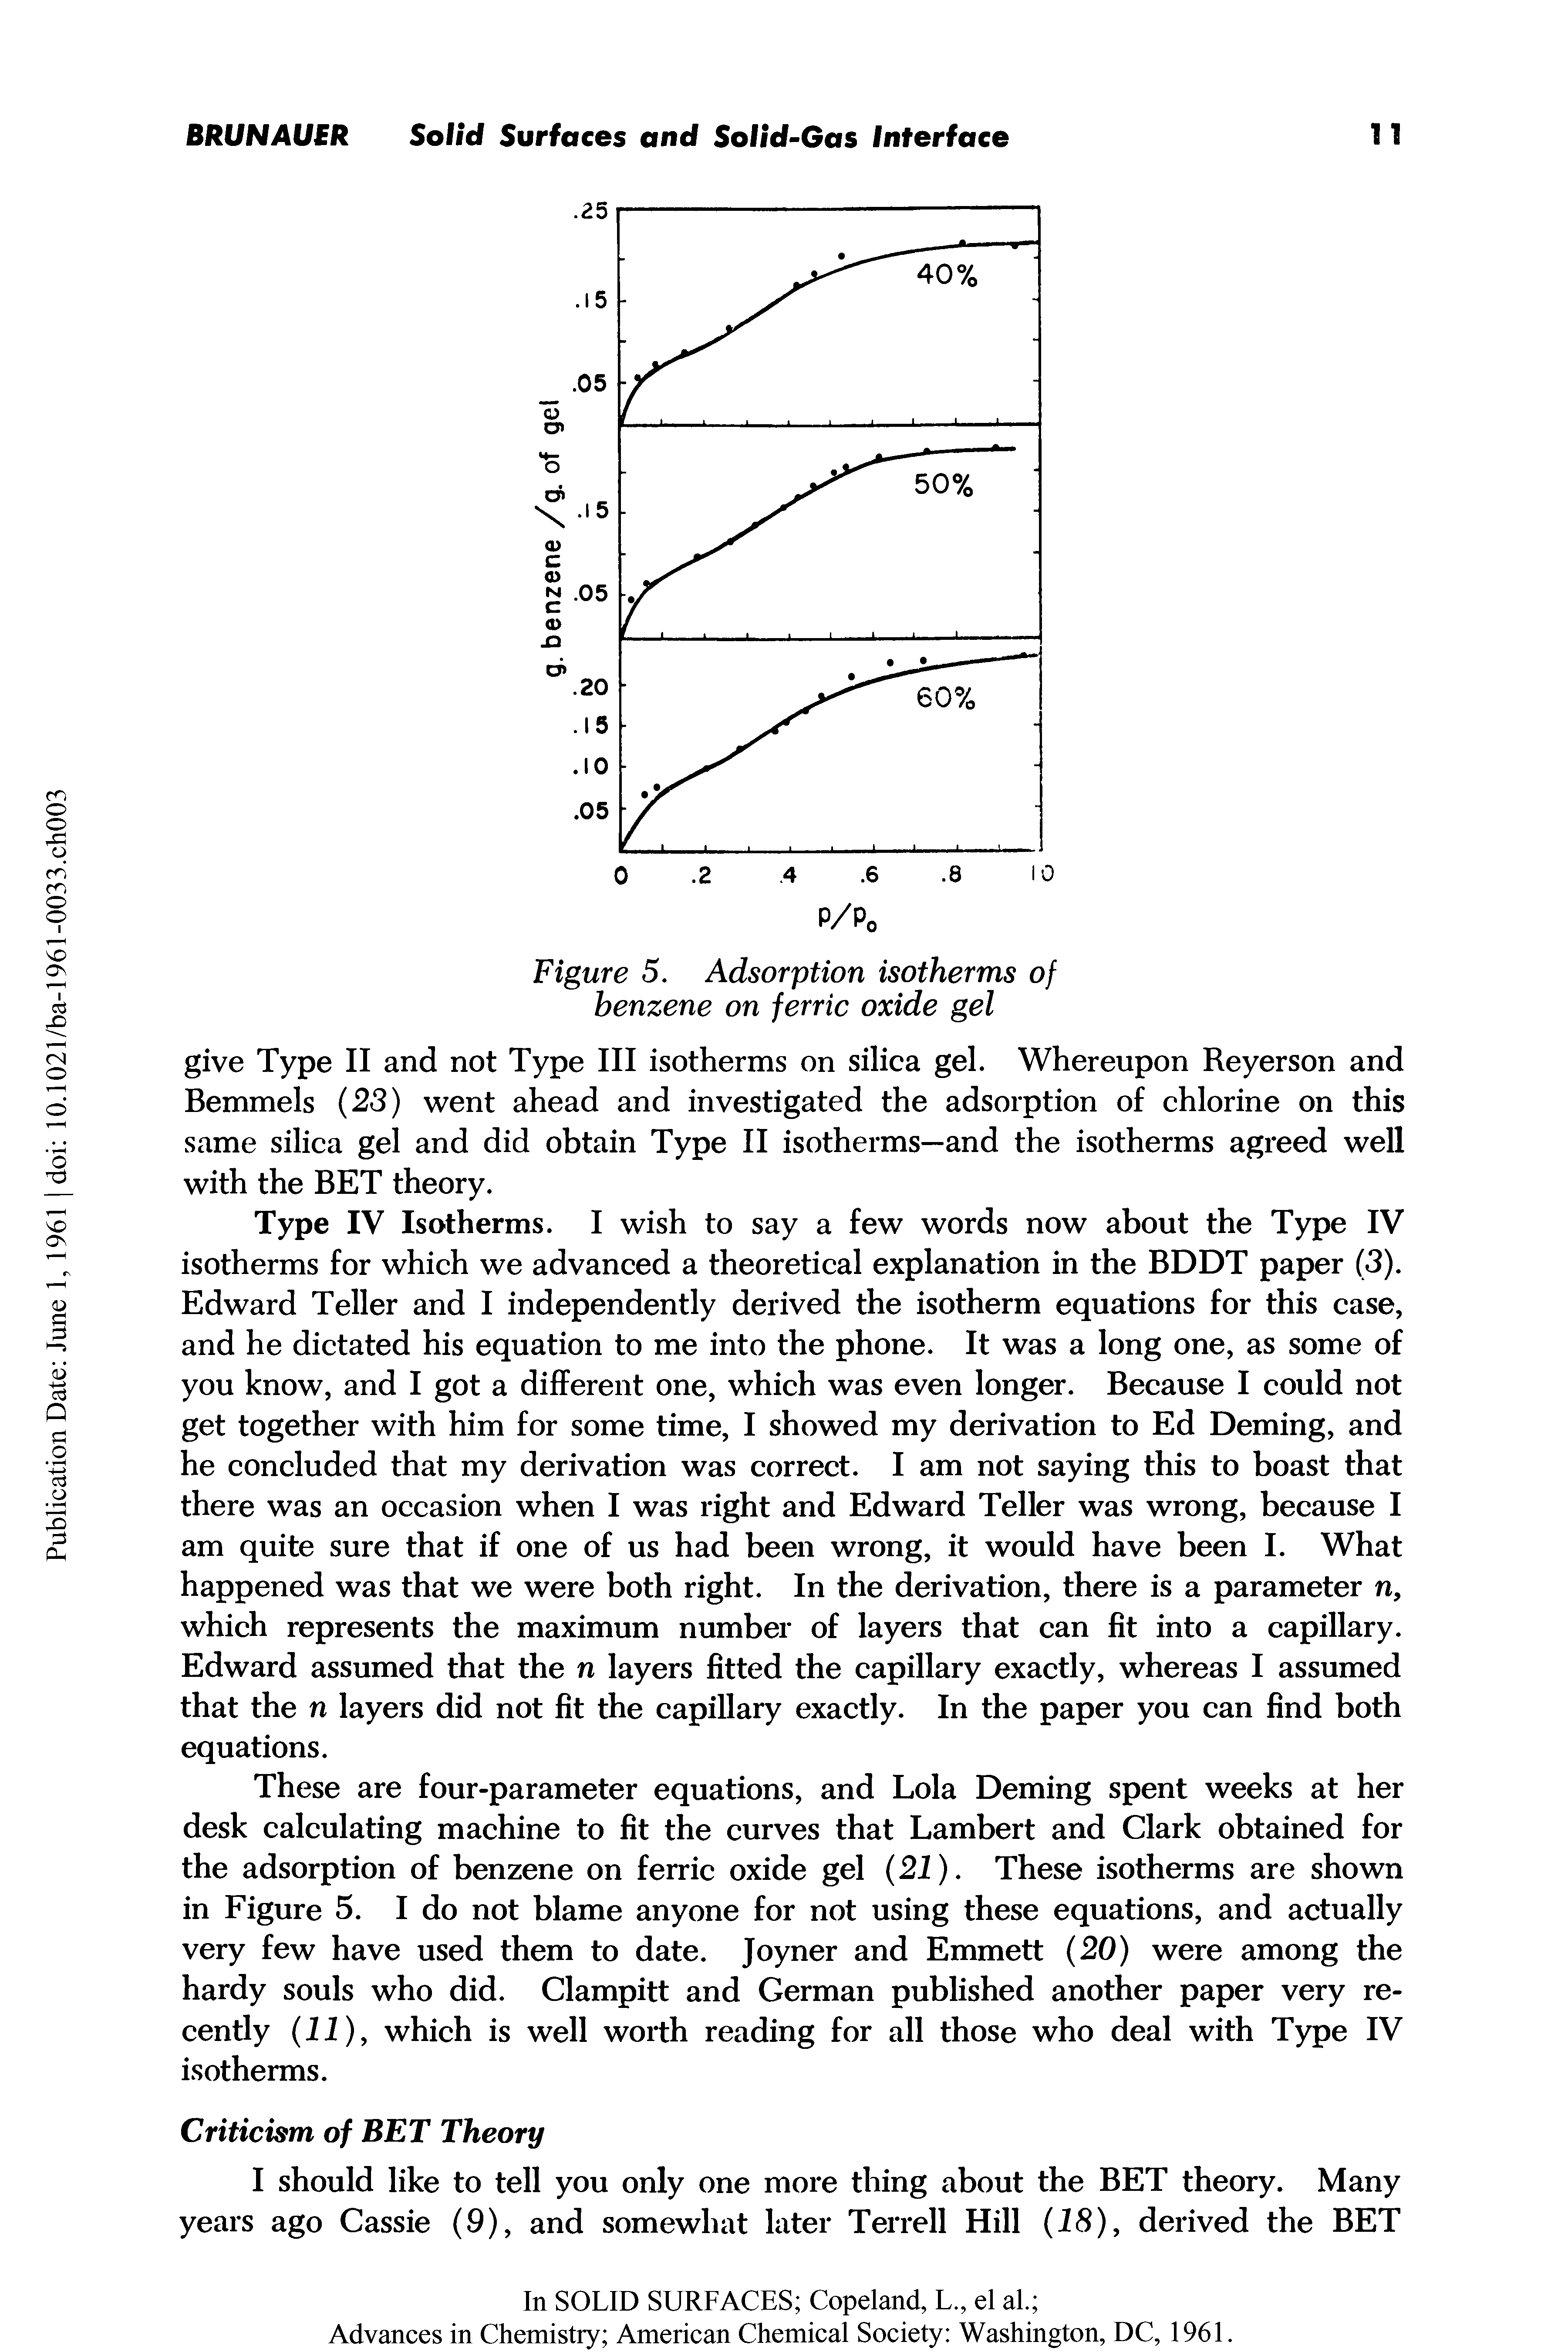 Figure 5. Adsorption isotherms of benzene on ferric oxide gel...